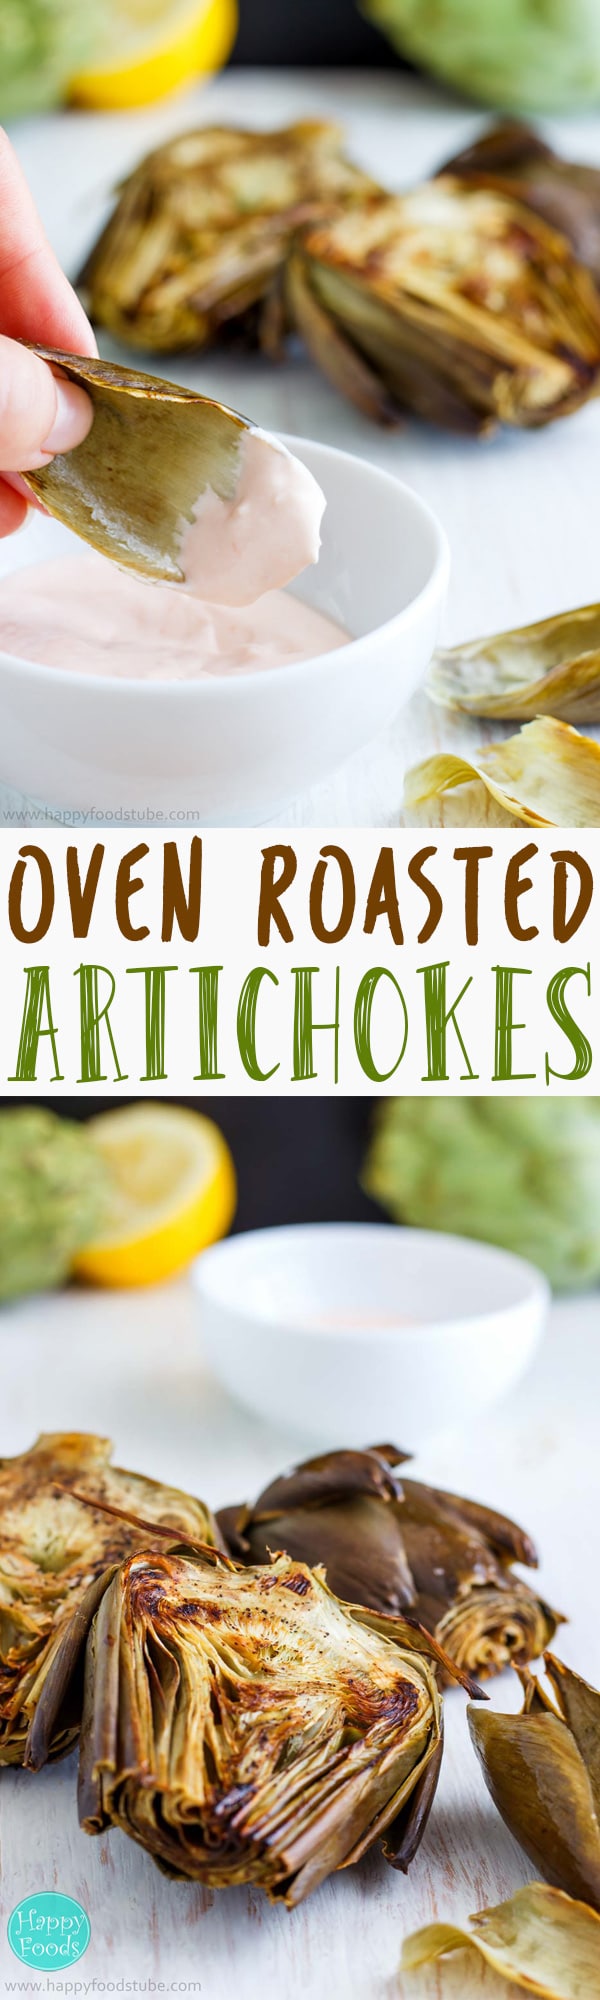 Oven Roasted Artichokes With Homemade Garlic Dip - healthy and super easy recipe, great vegetarian snacking option or starter with garlic sauce | happyfoodstube.com